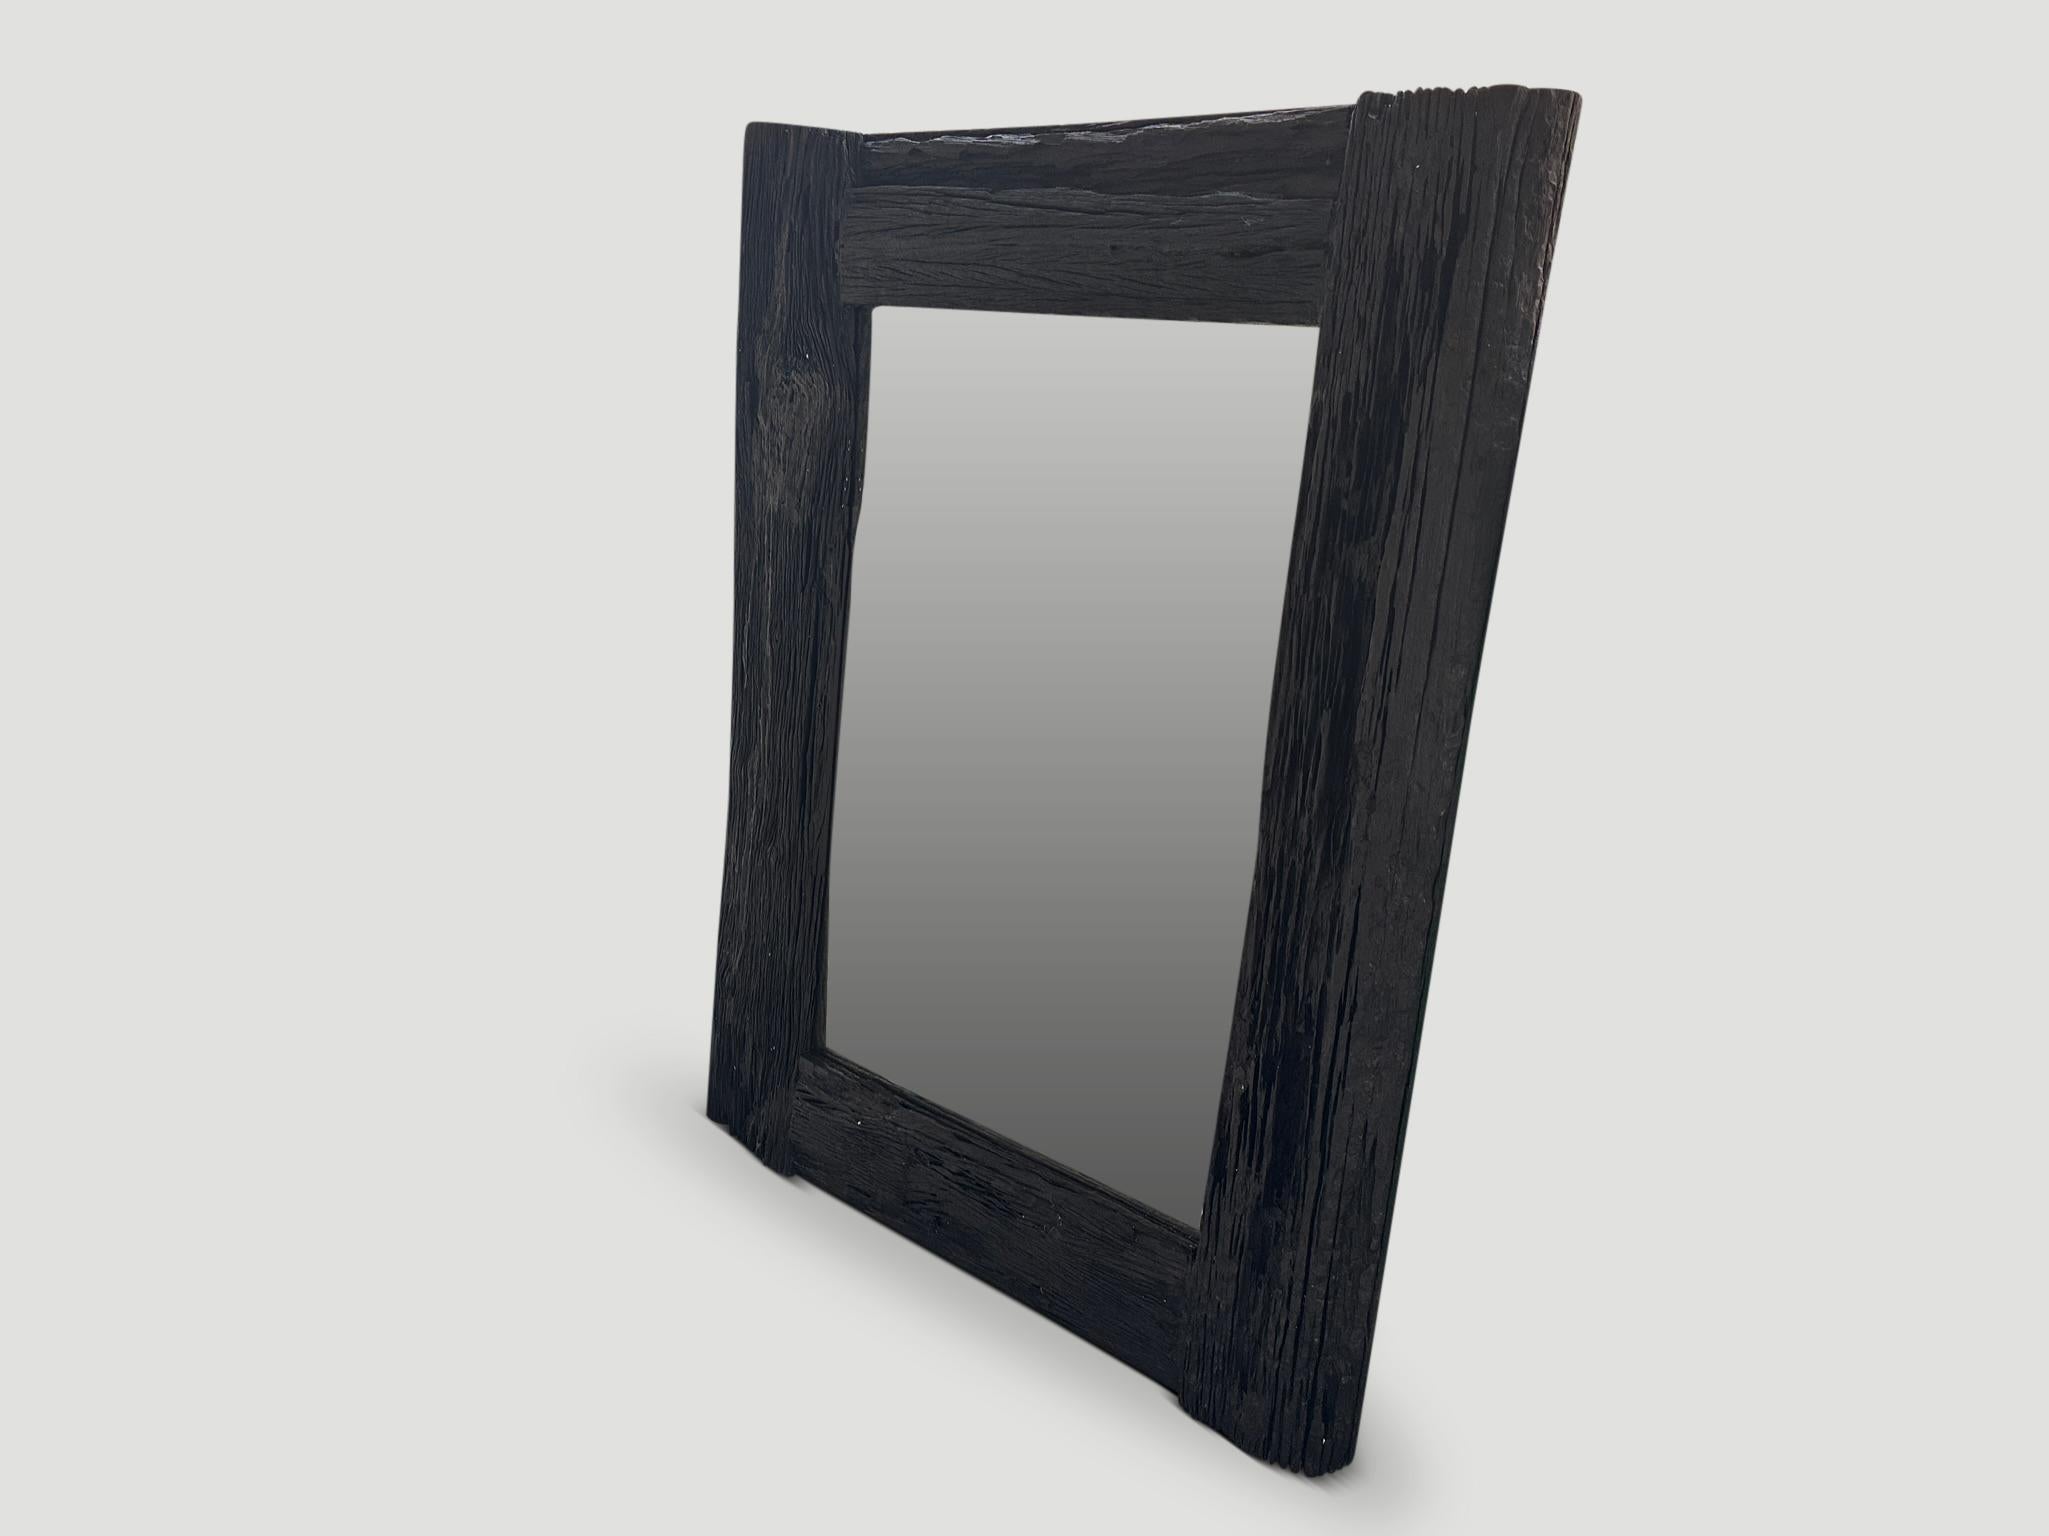 Impressive reclaimed ironwood frame mirror. Charred sanded and sealed revealing the beautiful wood grain. Custom finishes and sizes available. Please inquire. Full dimensions for the one shown;  61 x 44 x 3